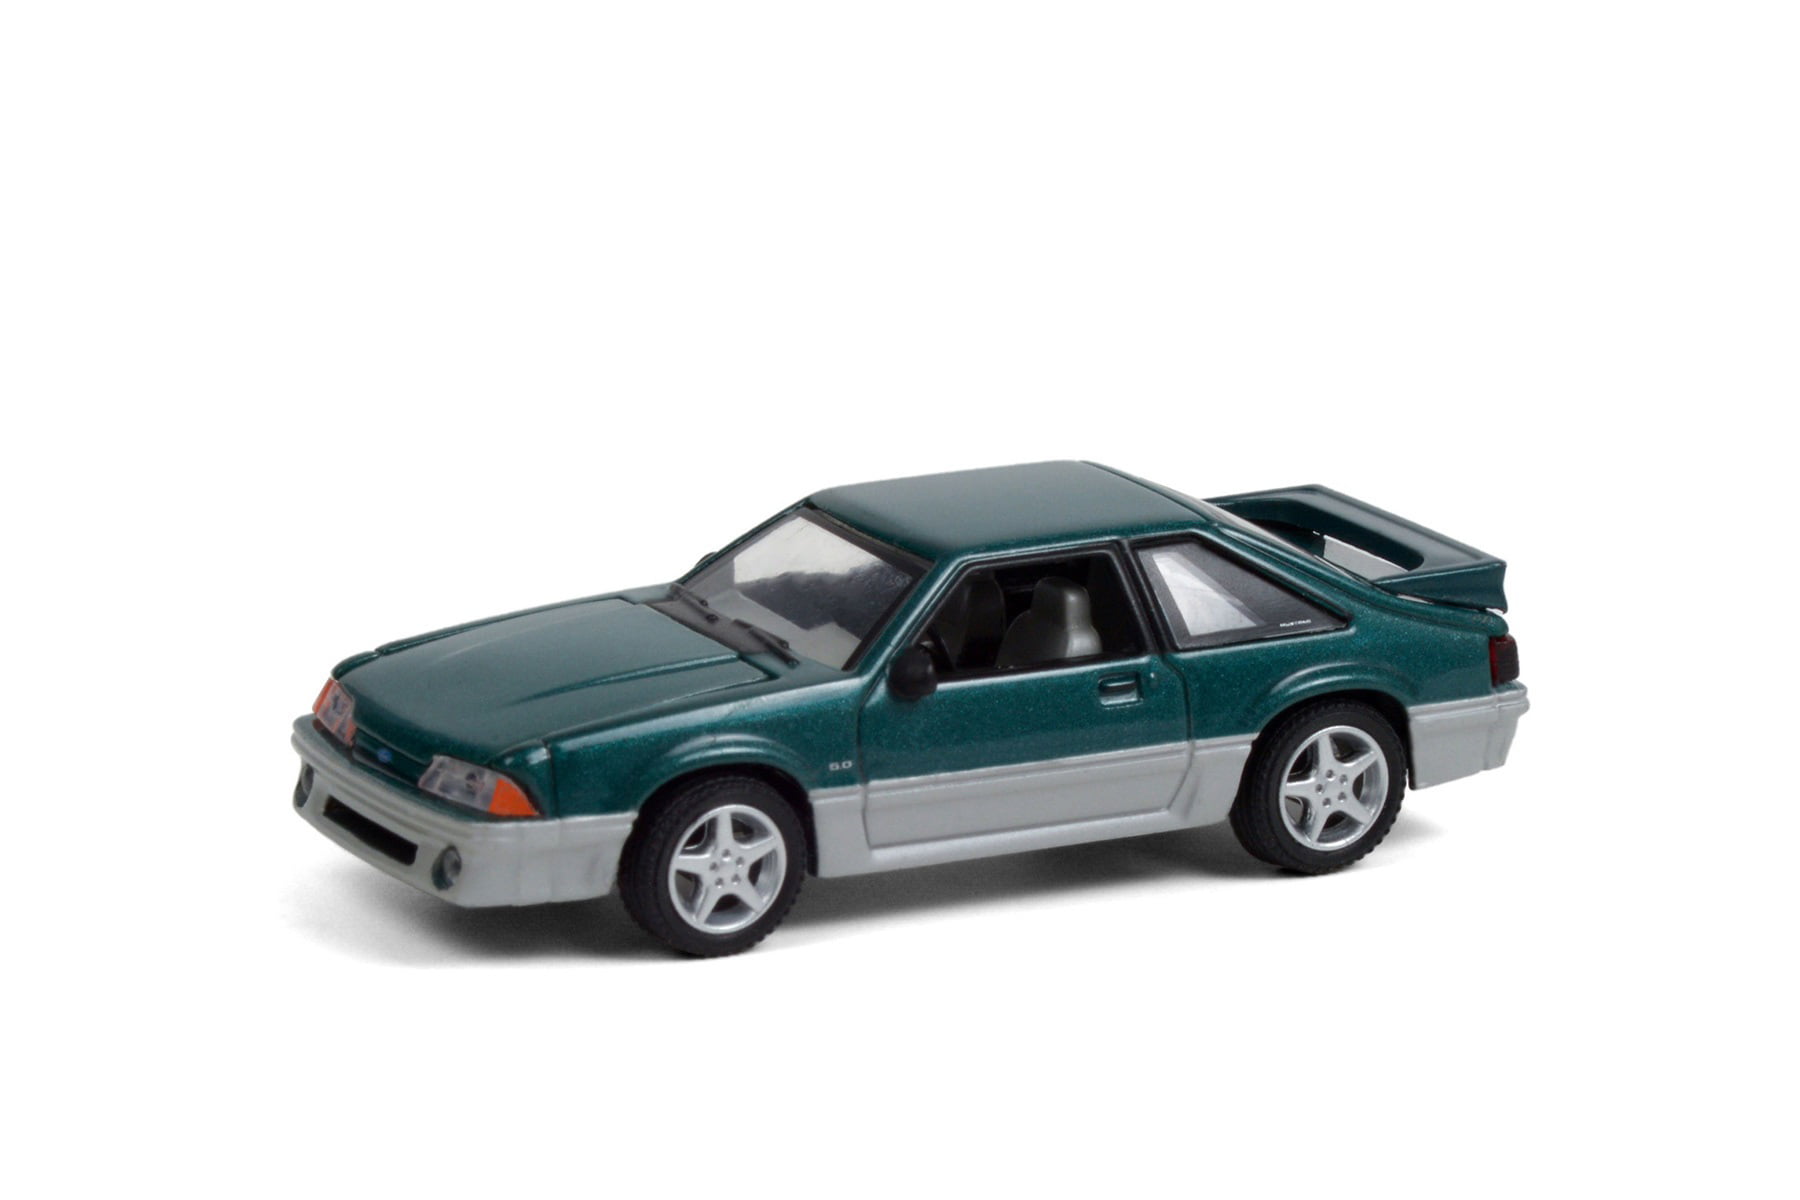 white 1980 ford mustang foxbody new 1/64 scal diecast greenlight limited edition